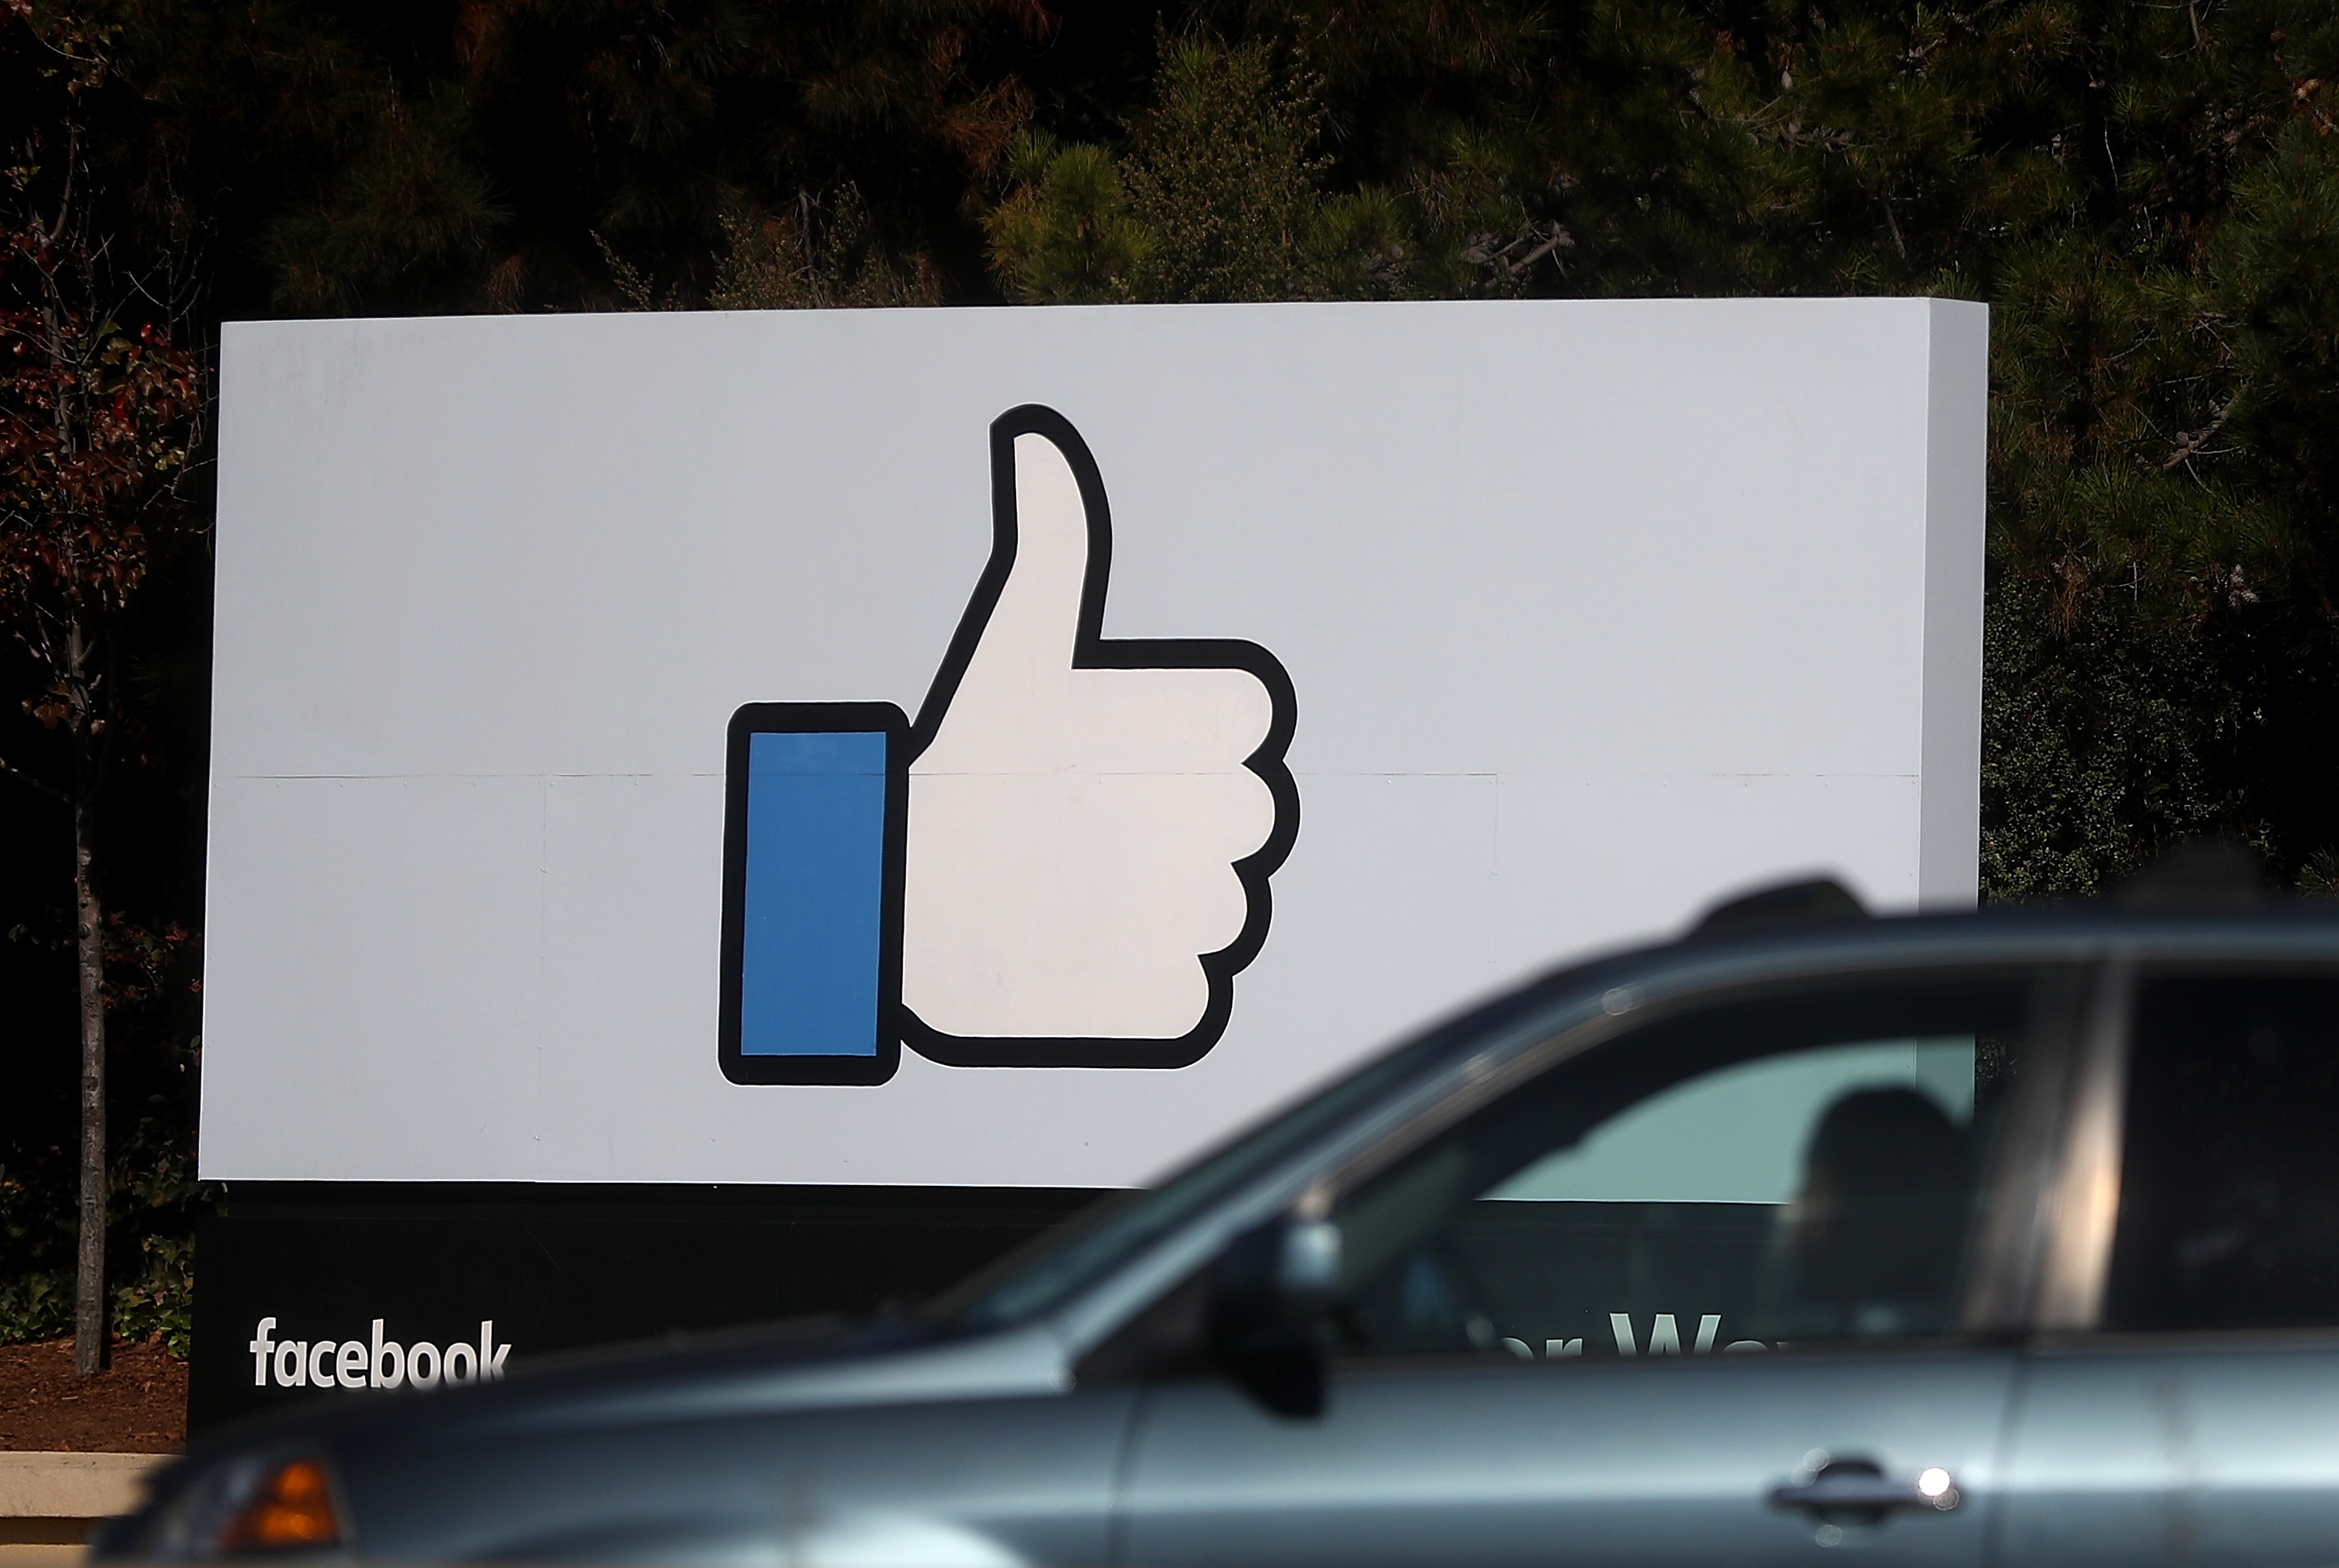 The Facebook thumbs-up at the California HQ